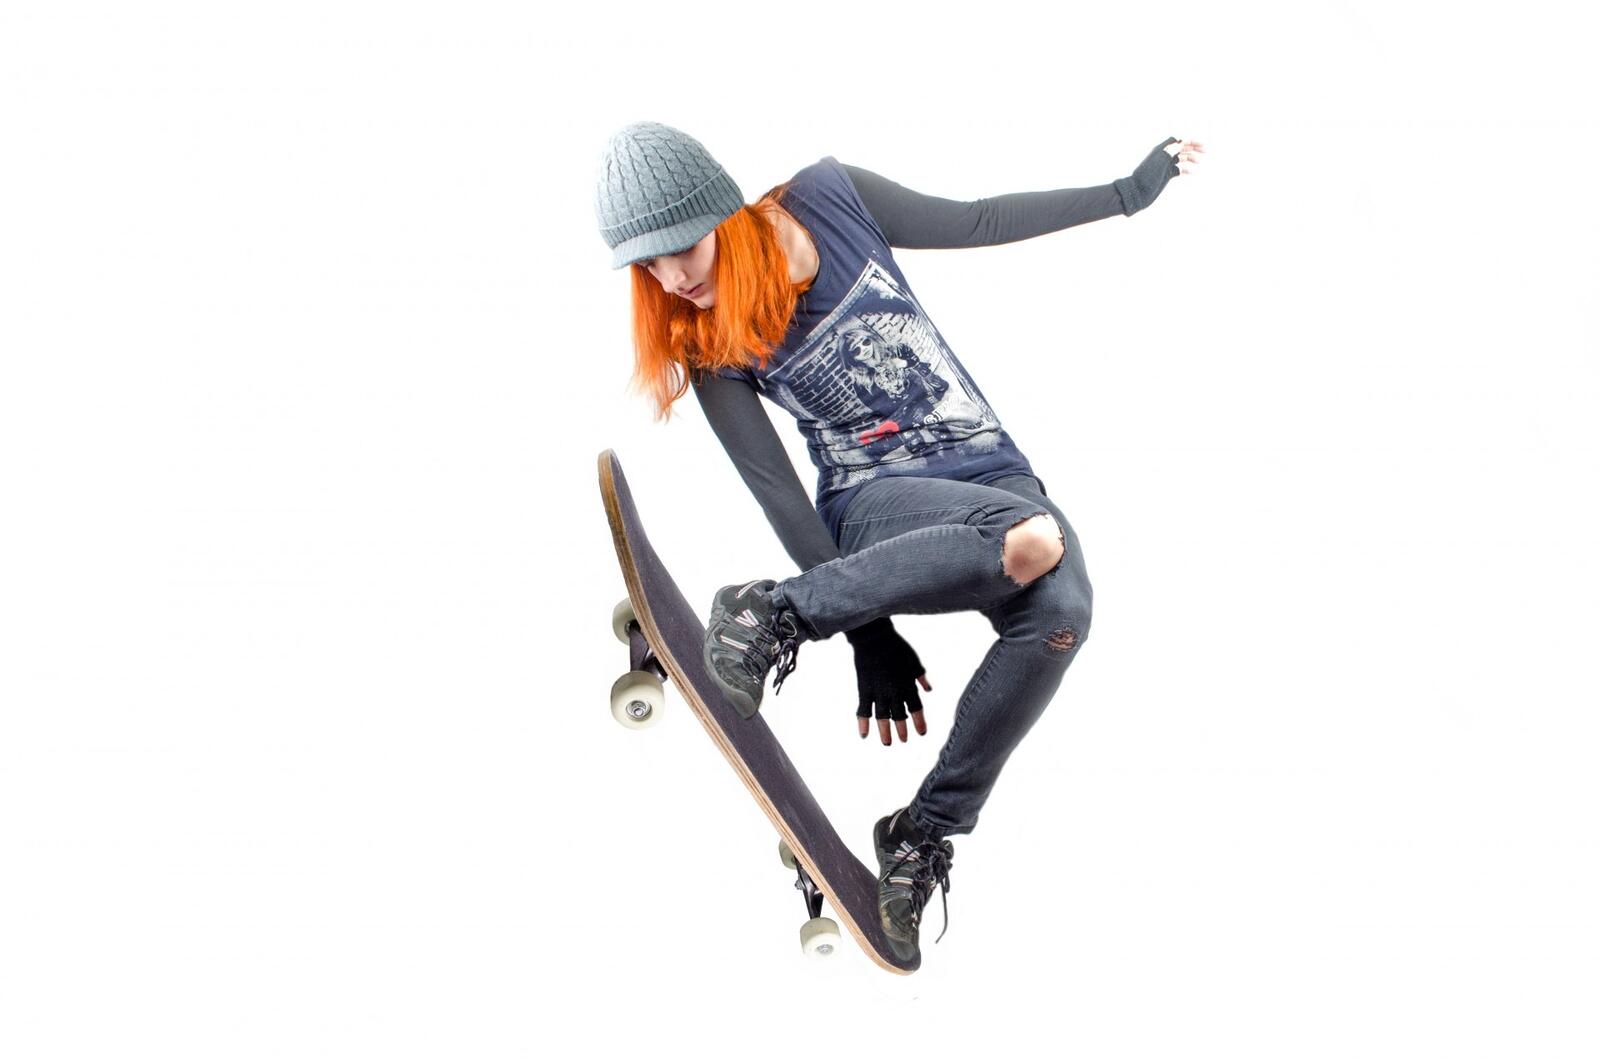 Free photo A girl with red hair jumps on a skateboard